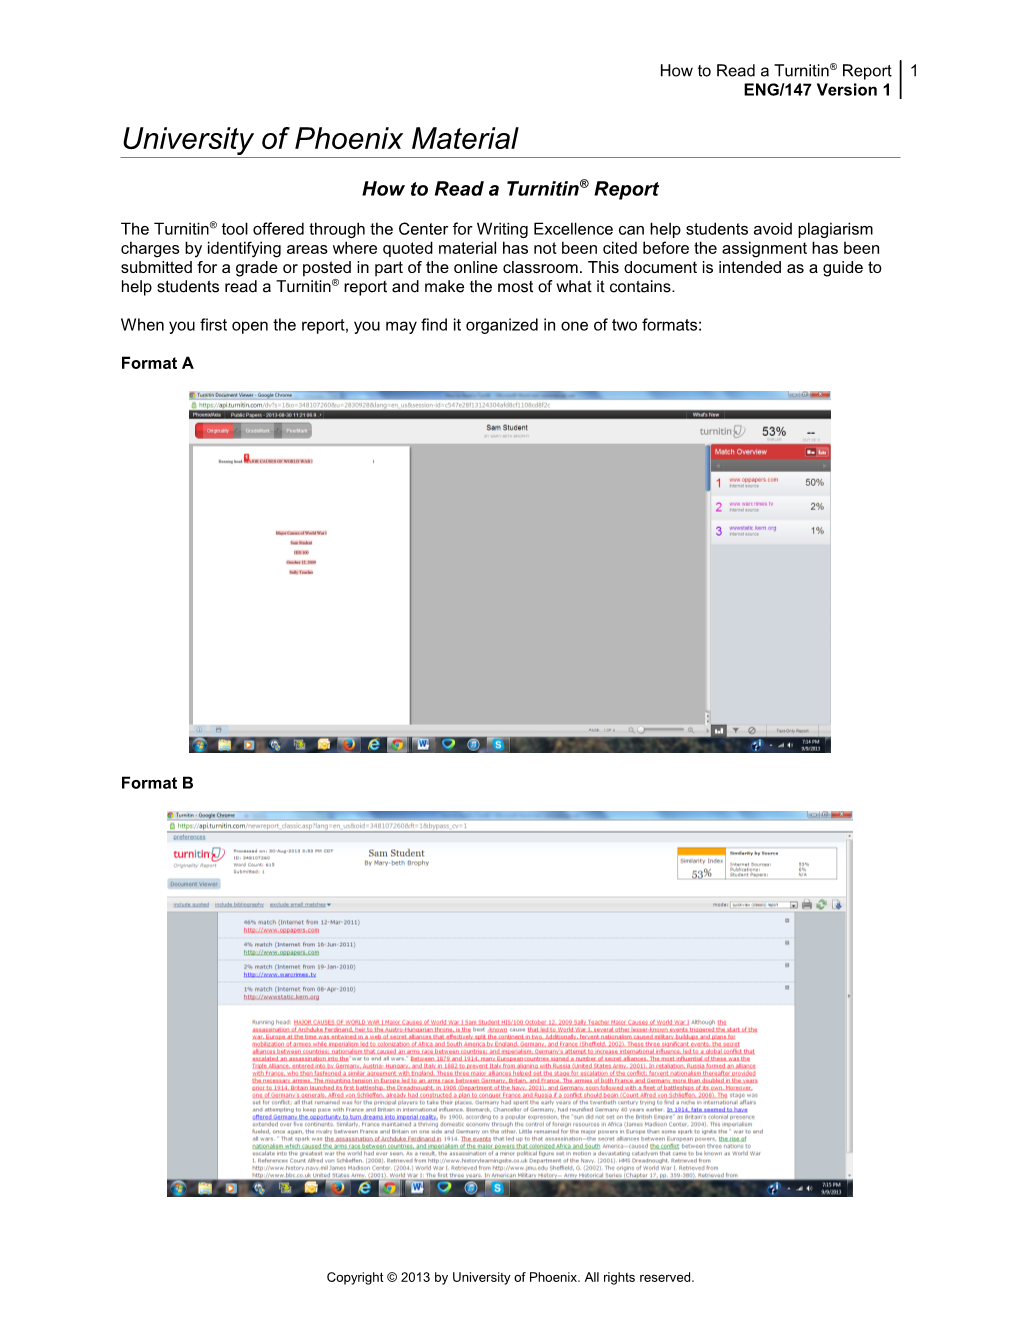 How to Read a Turnitin Report